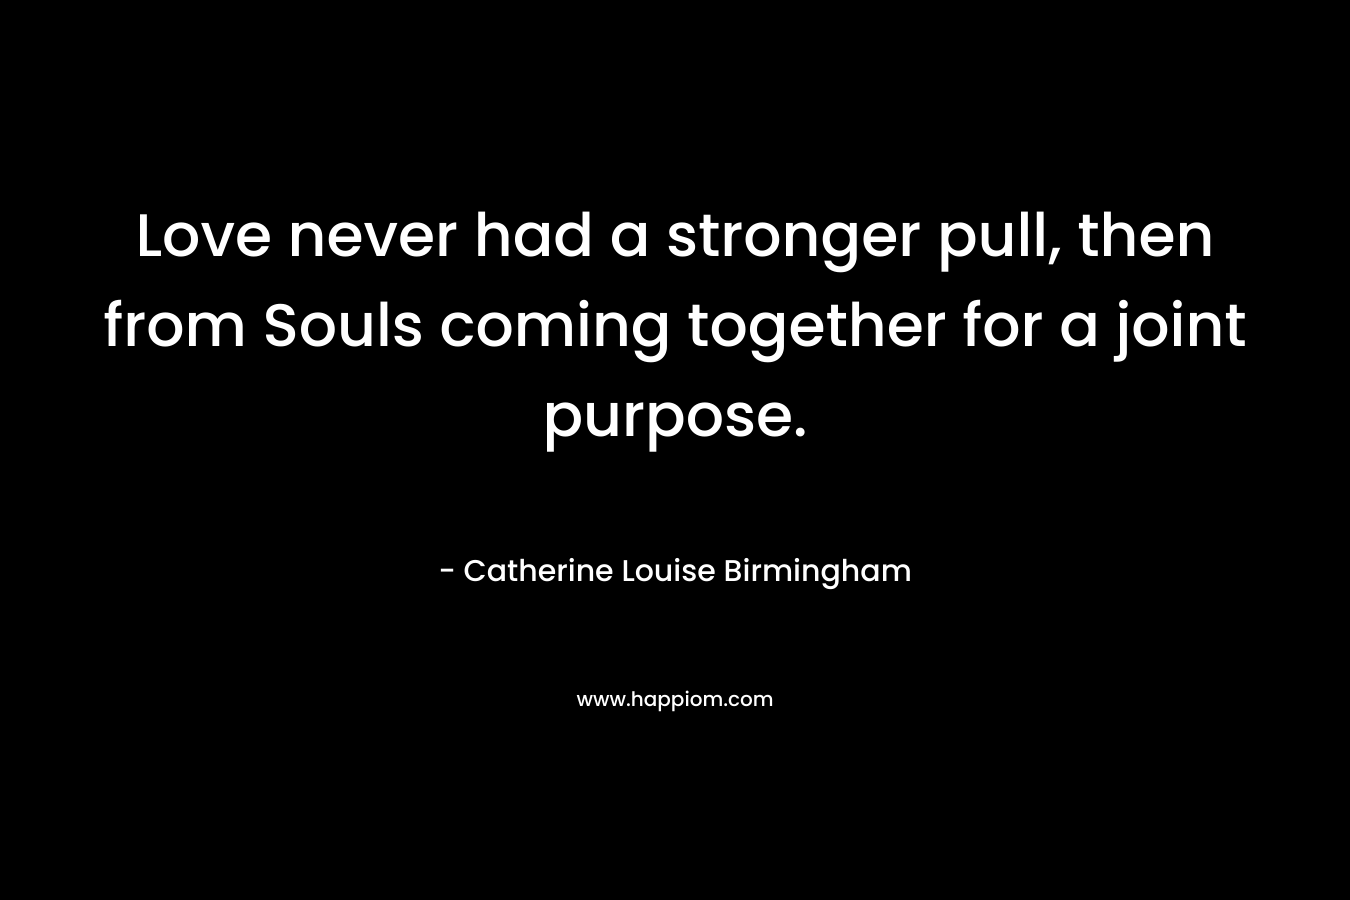 Love never had a stronger pull, then from Souls coming together for a joint purpose. – Catherine Louise Birmingham